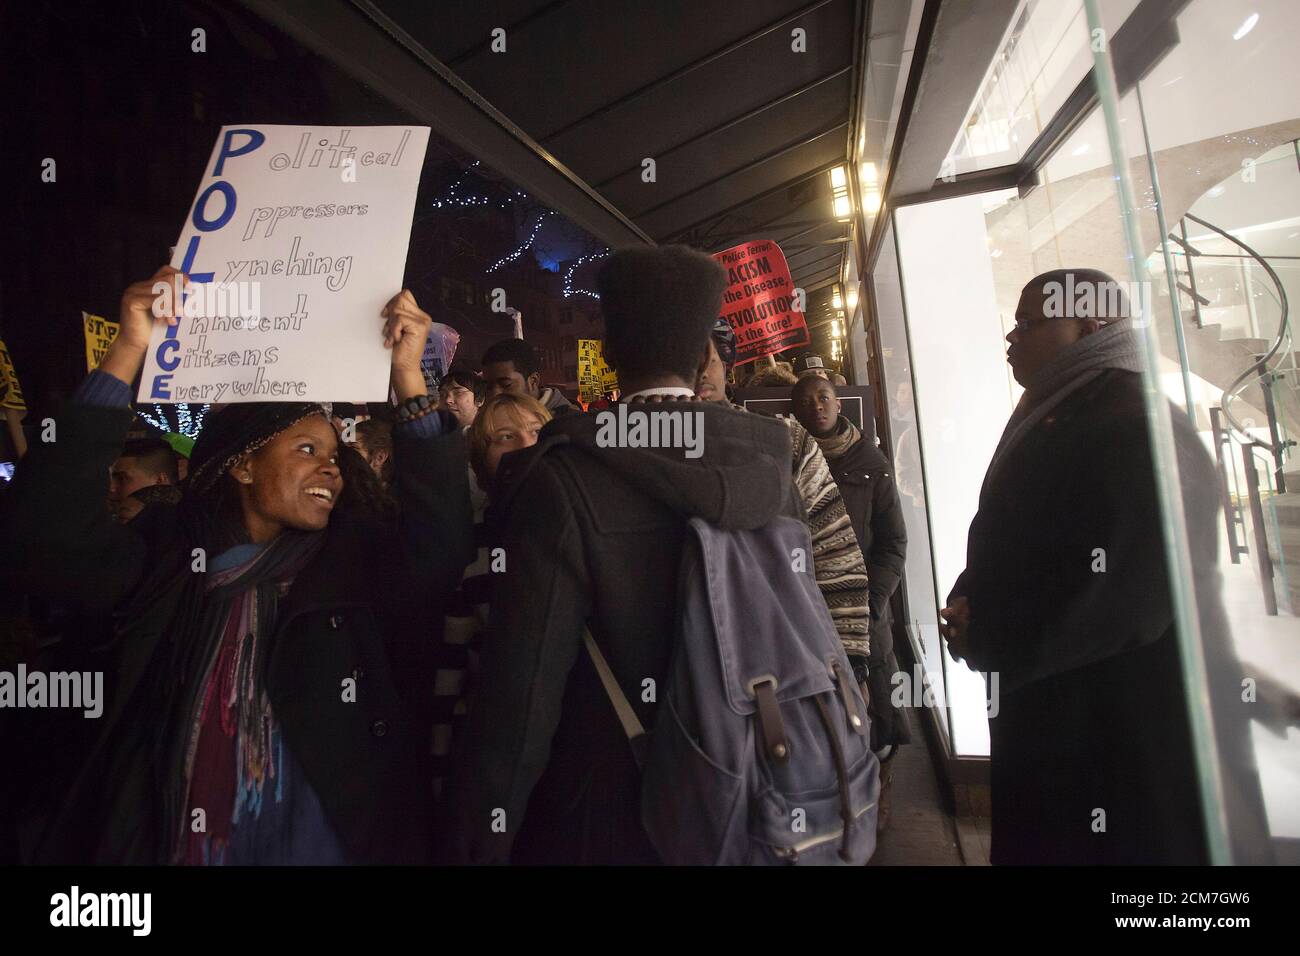 A protester holding a sign passes by a luxury store guarded by a security officer as fellow protesters walk up Madison Ave during a demonstration against the police in the Manhattan borough of New York December 23, 2014. Mayor Bill de Blasio's attempts to soothe a city dismayed by the slaying of two officers were further rebuffed on Tuesday as protesters defied his call to suspend what have become regular demonstrations over excessive police force. REUTERS/Carlo Allegri (UNITED STATES - Tags: CRIME LAW CIVIL UNREST) Stock Photo